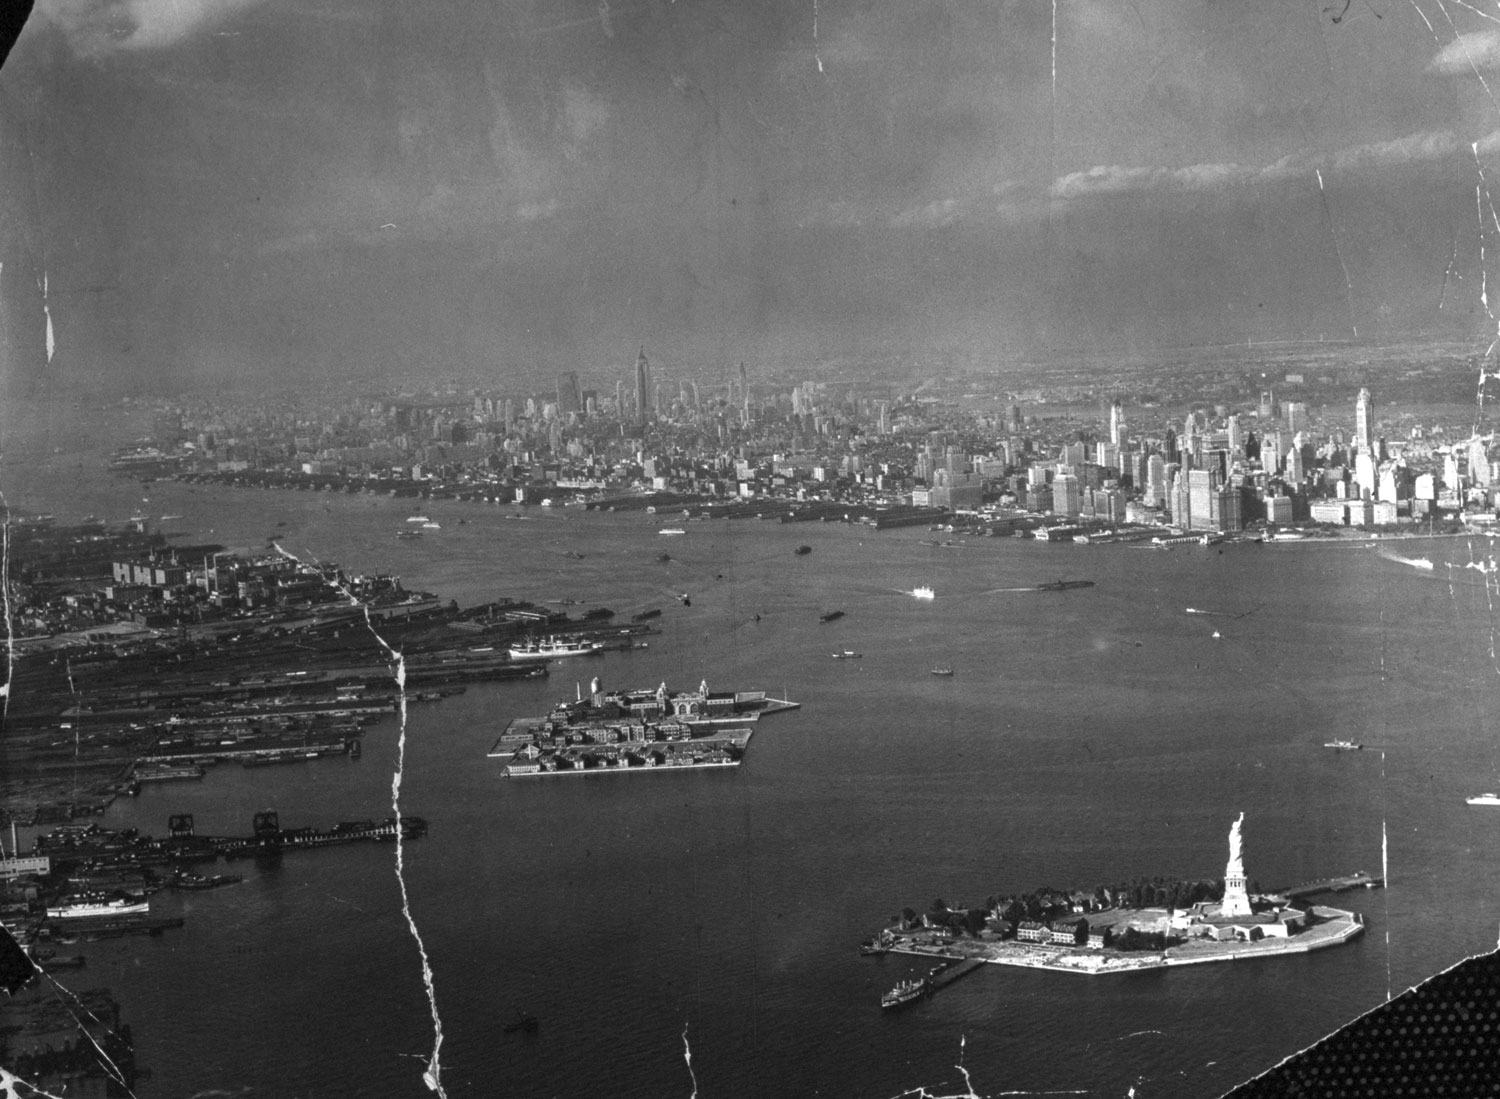 Statue of Liberty and New York Harbor, 1939.